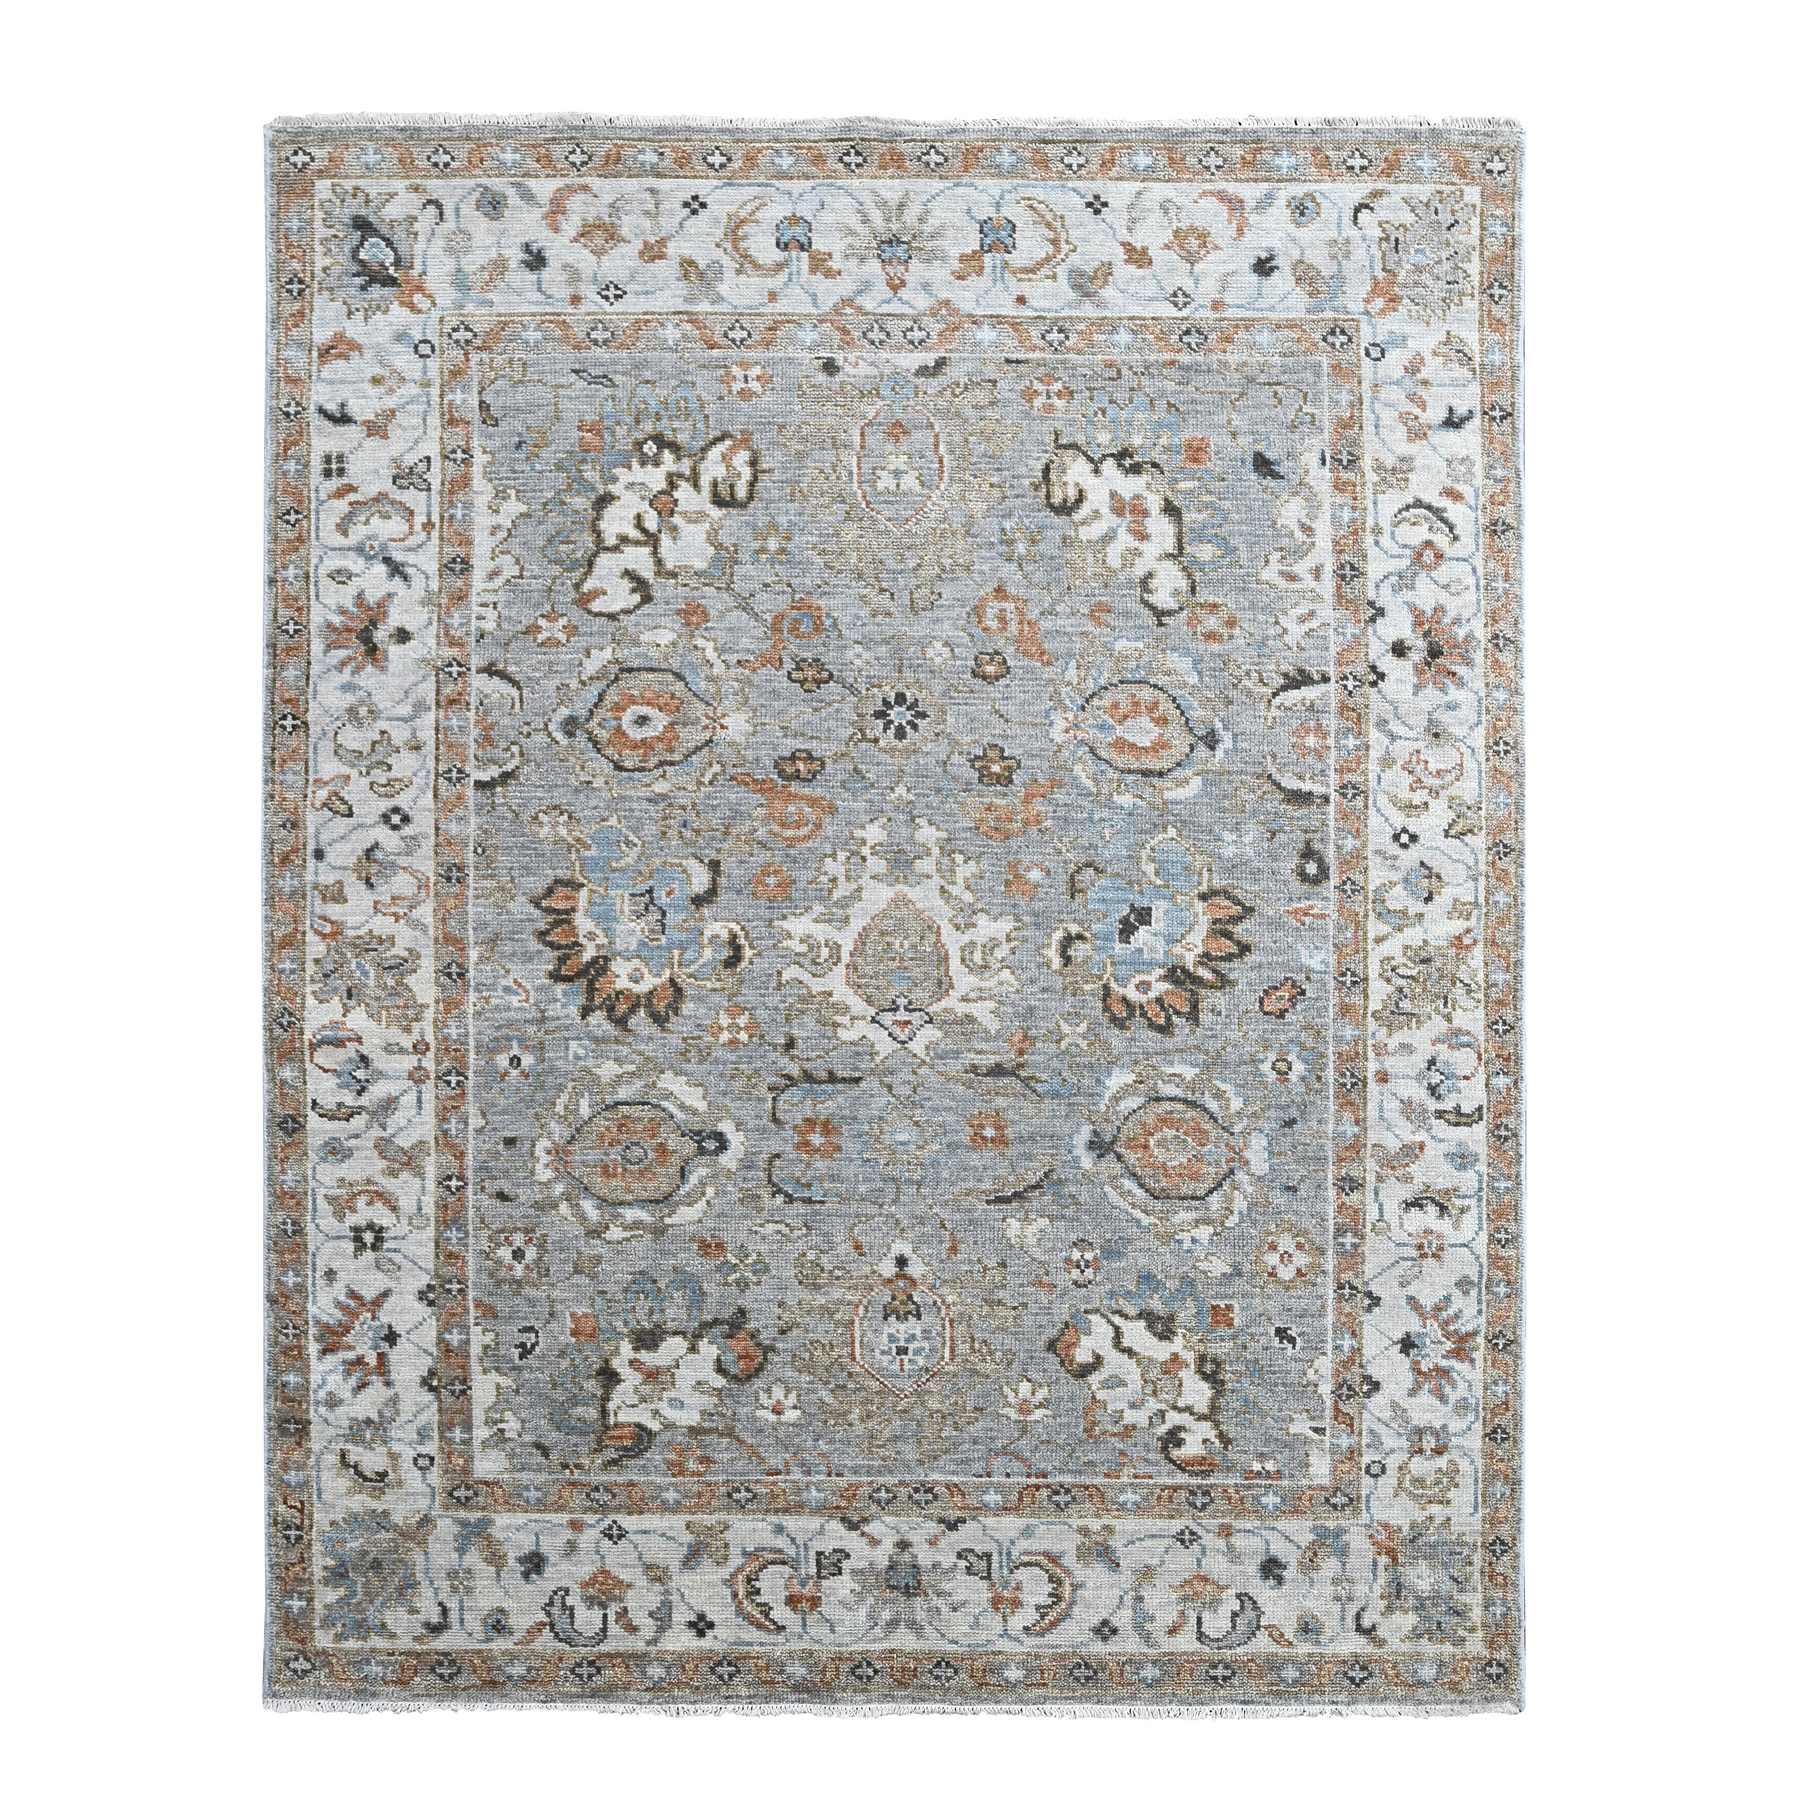 Oyster Gray, Decorators White Border, Plush and Lush, Hand Knotted Oushak Inspired Supple Collection, 100% Wool, Oriental Rug